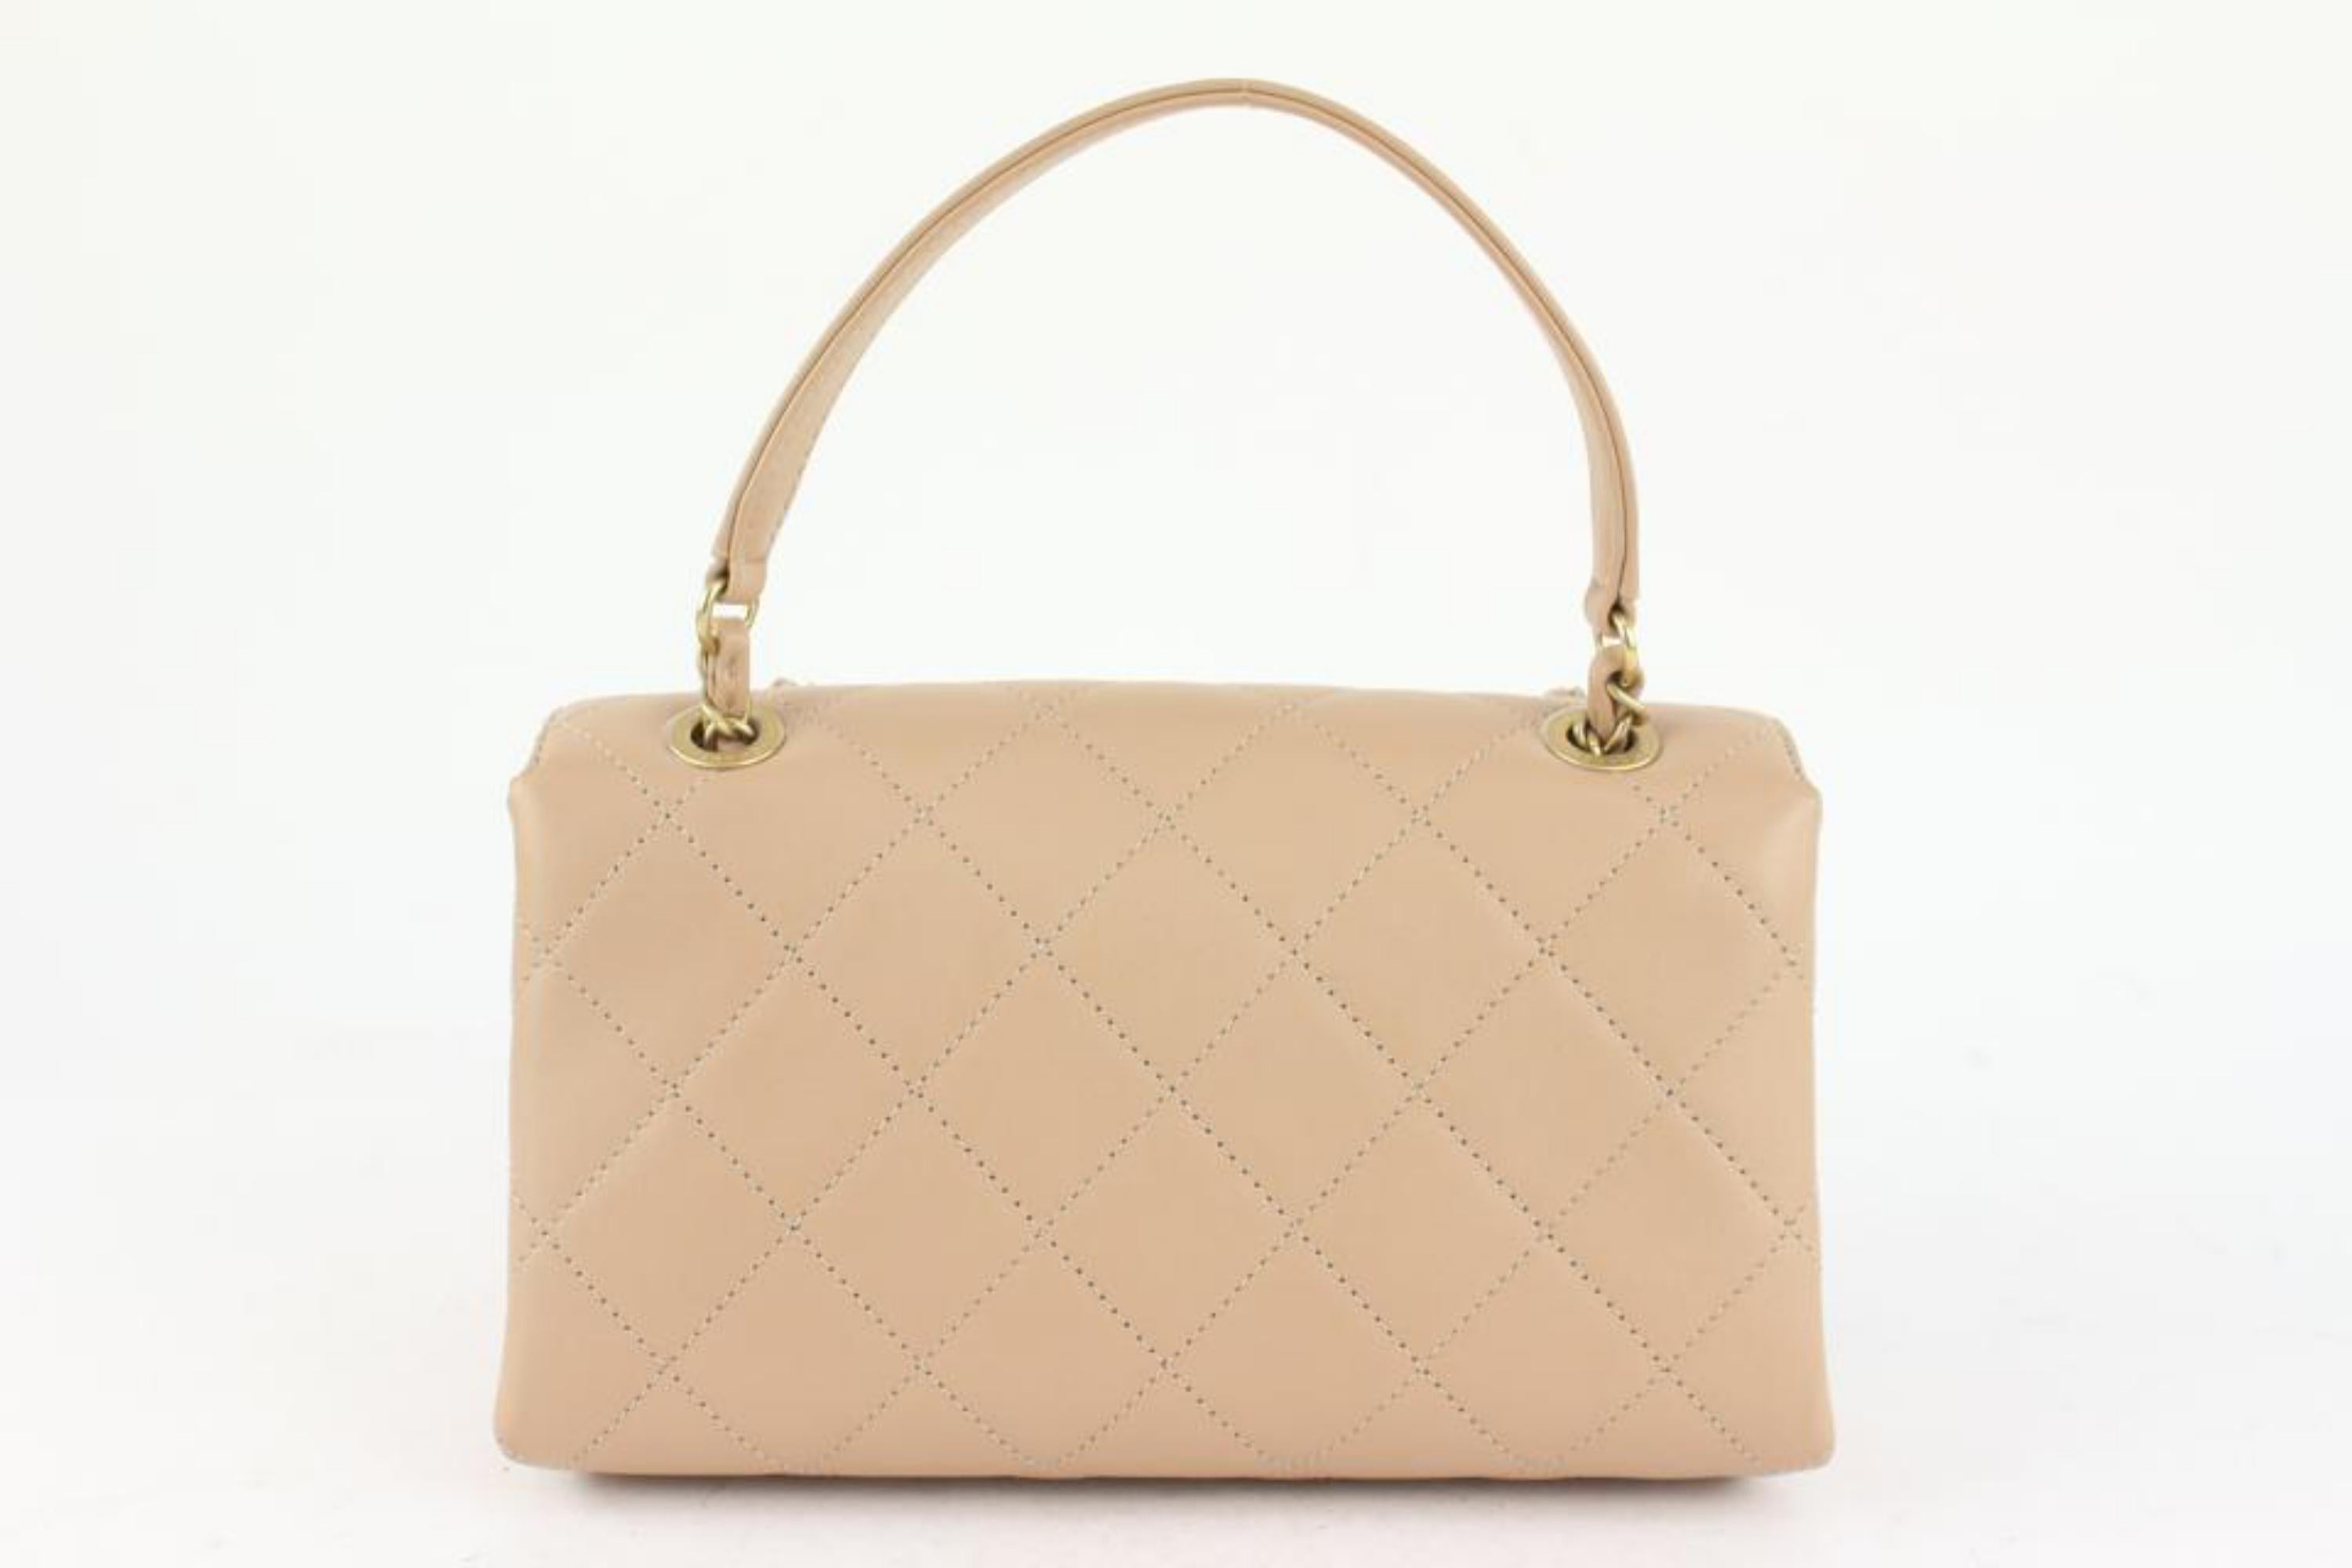 Chanel Quilted Beige Leather Enchained Top Handle Crossbody Flap Bag 1111C27 For Sale 3